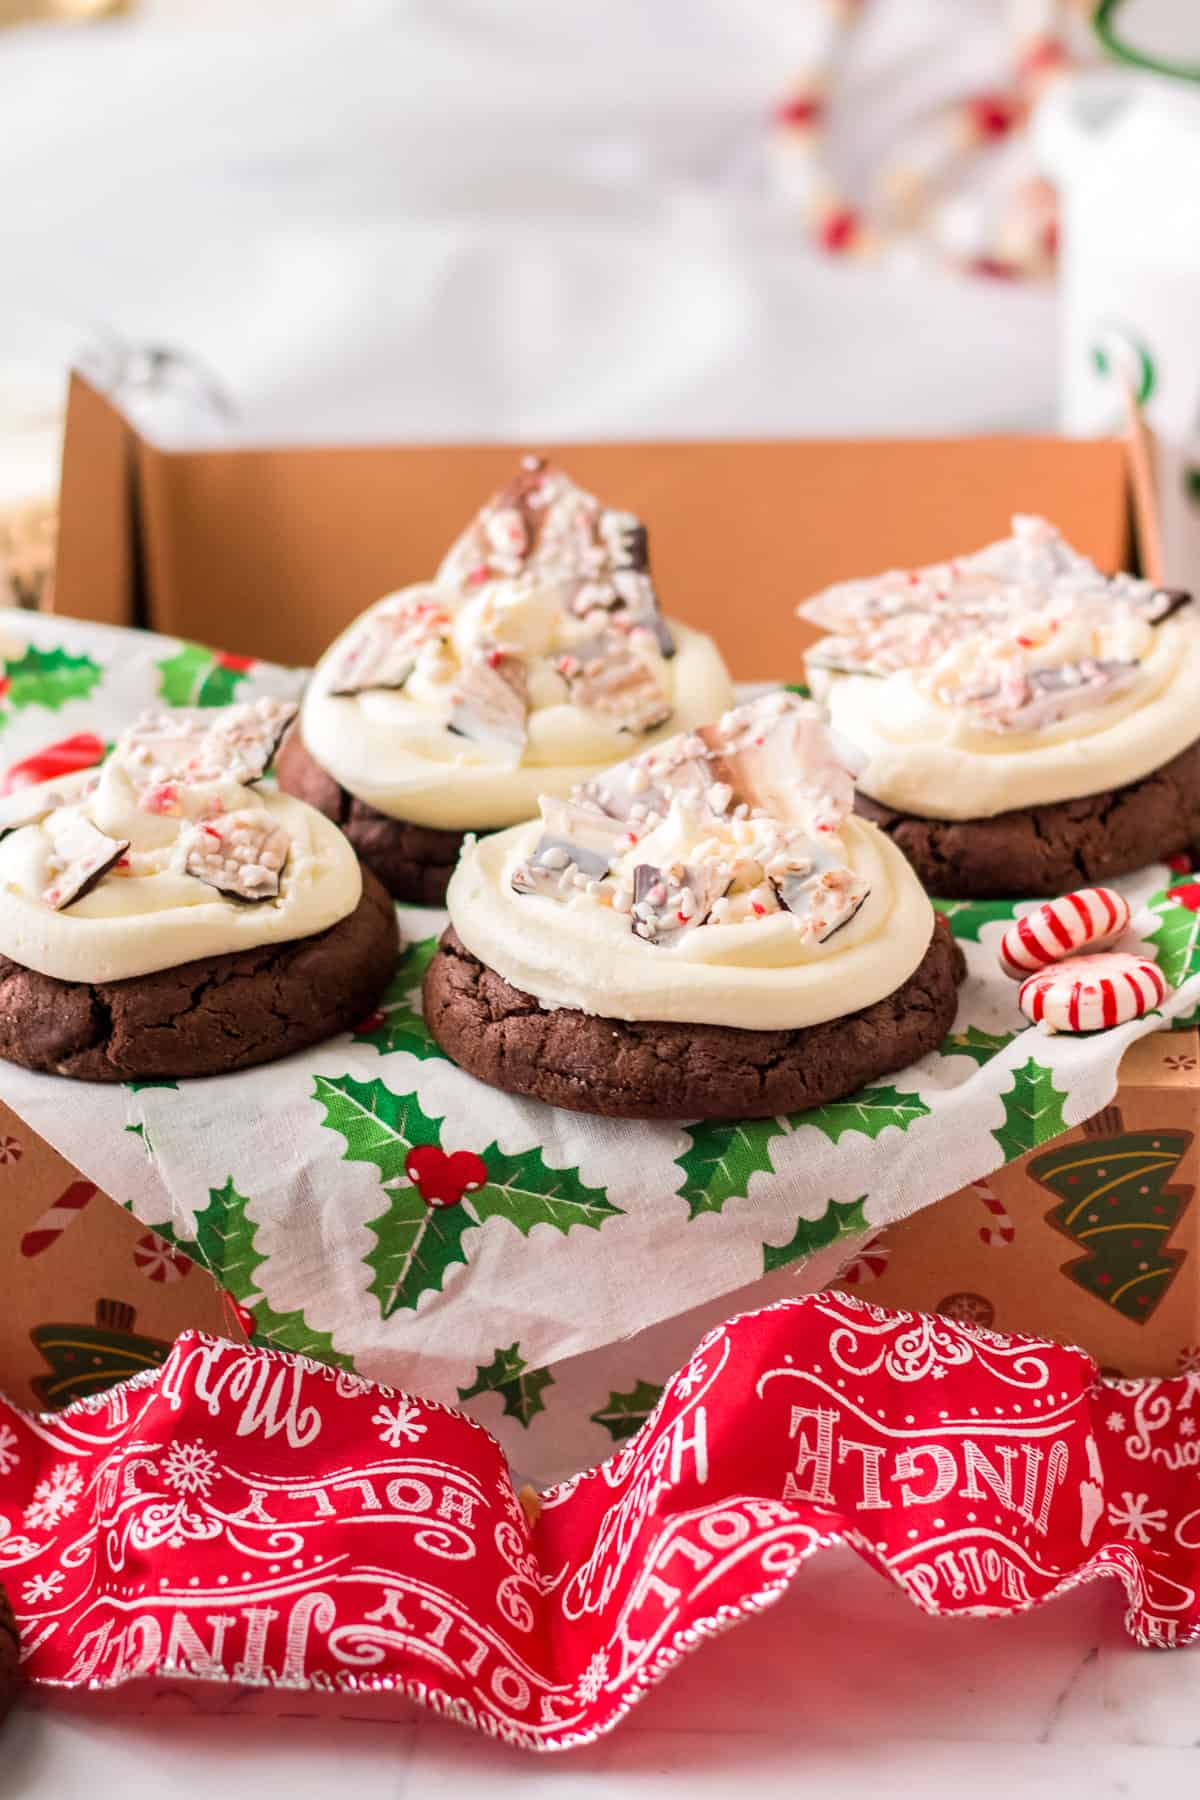 Chocolate peppermint bark cookies in gift box with mistletoe tissue paper.